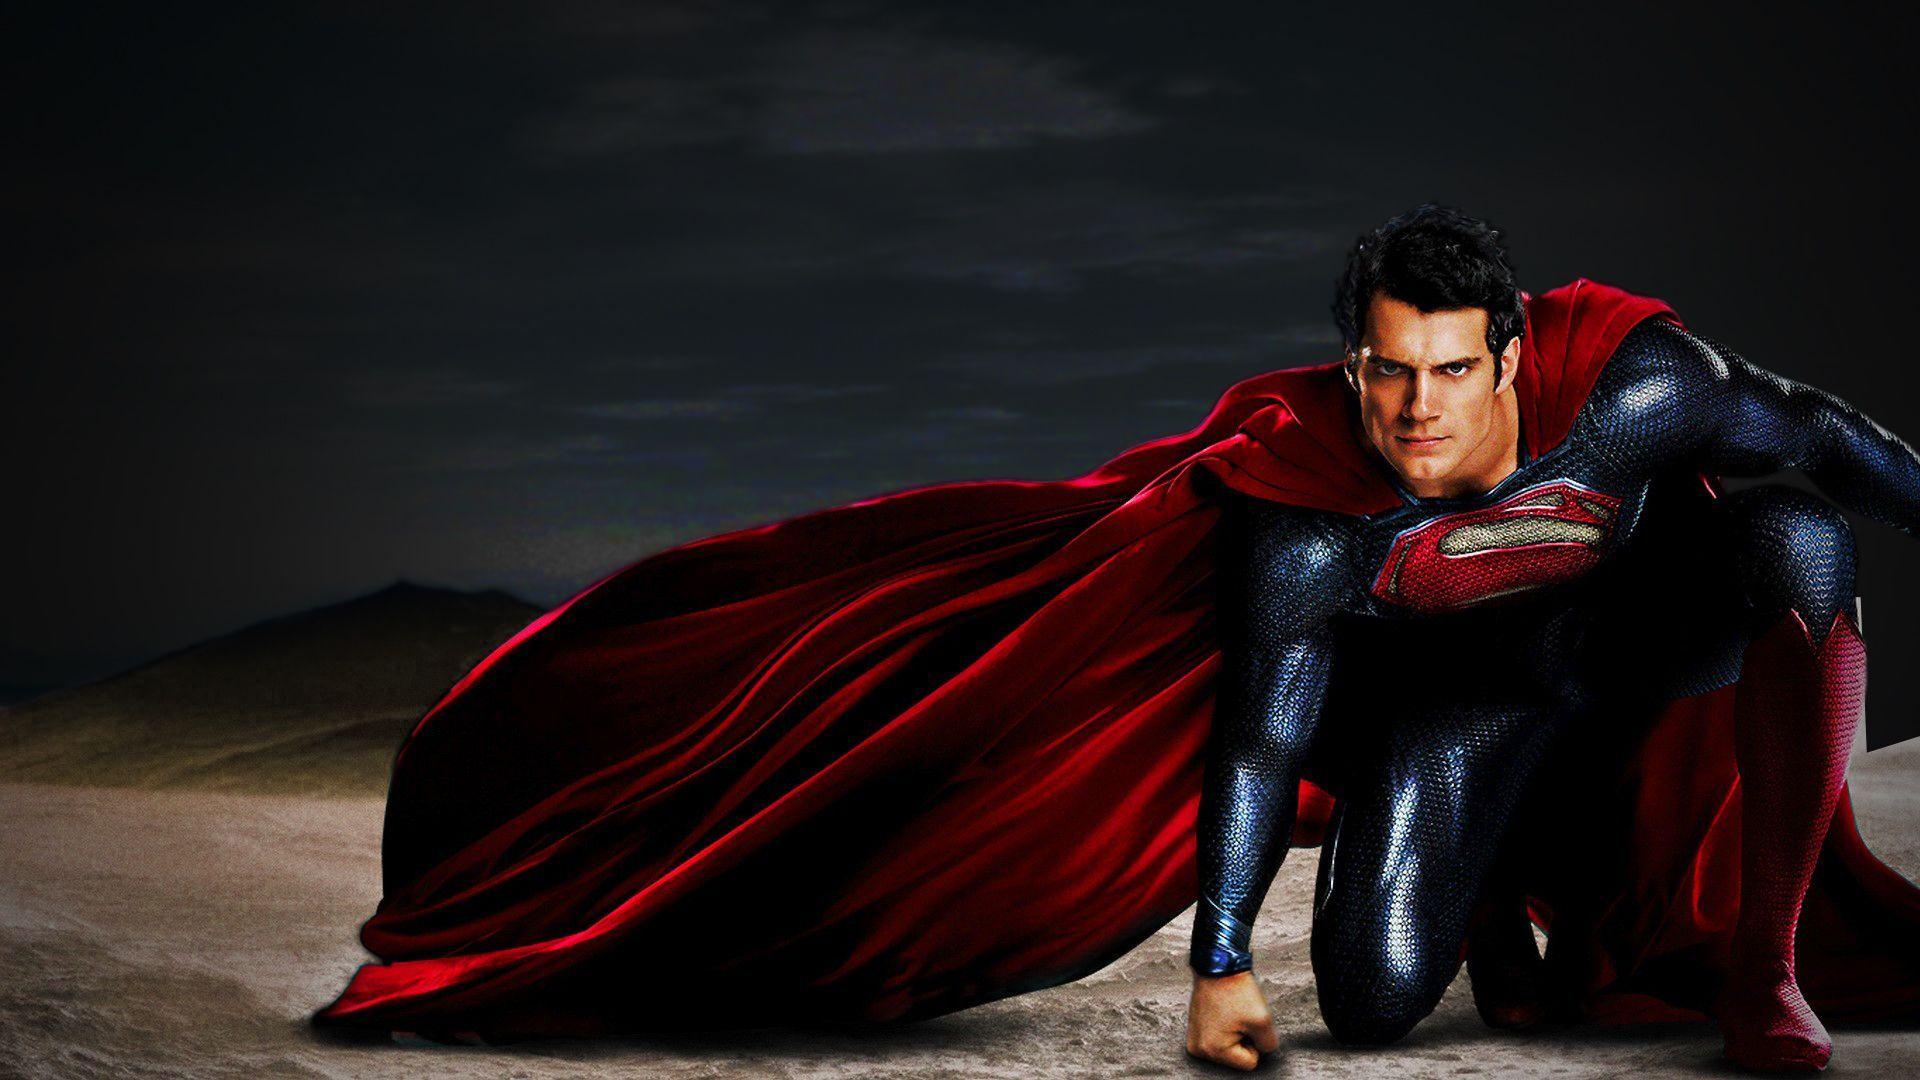 Man of Steel Wallpaper HD. Movies To Watch. Dc comic